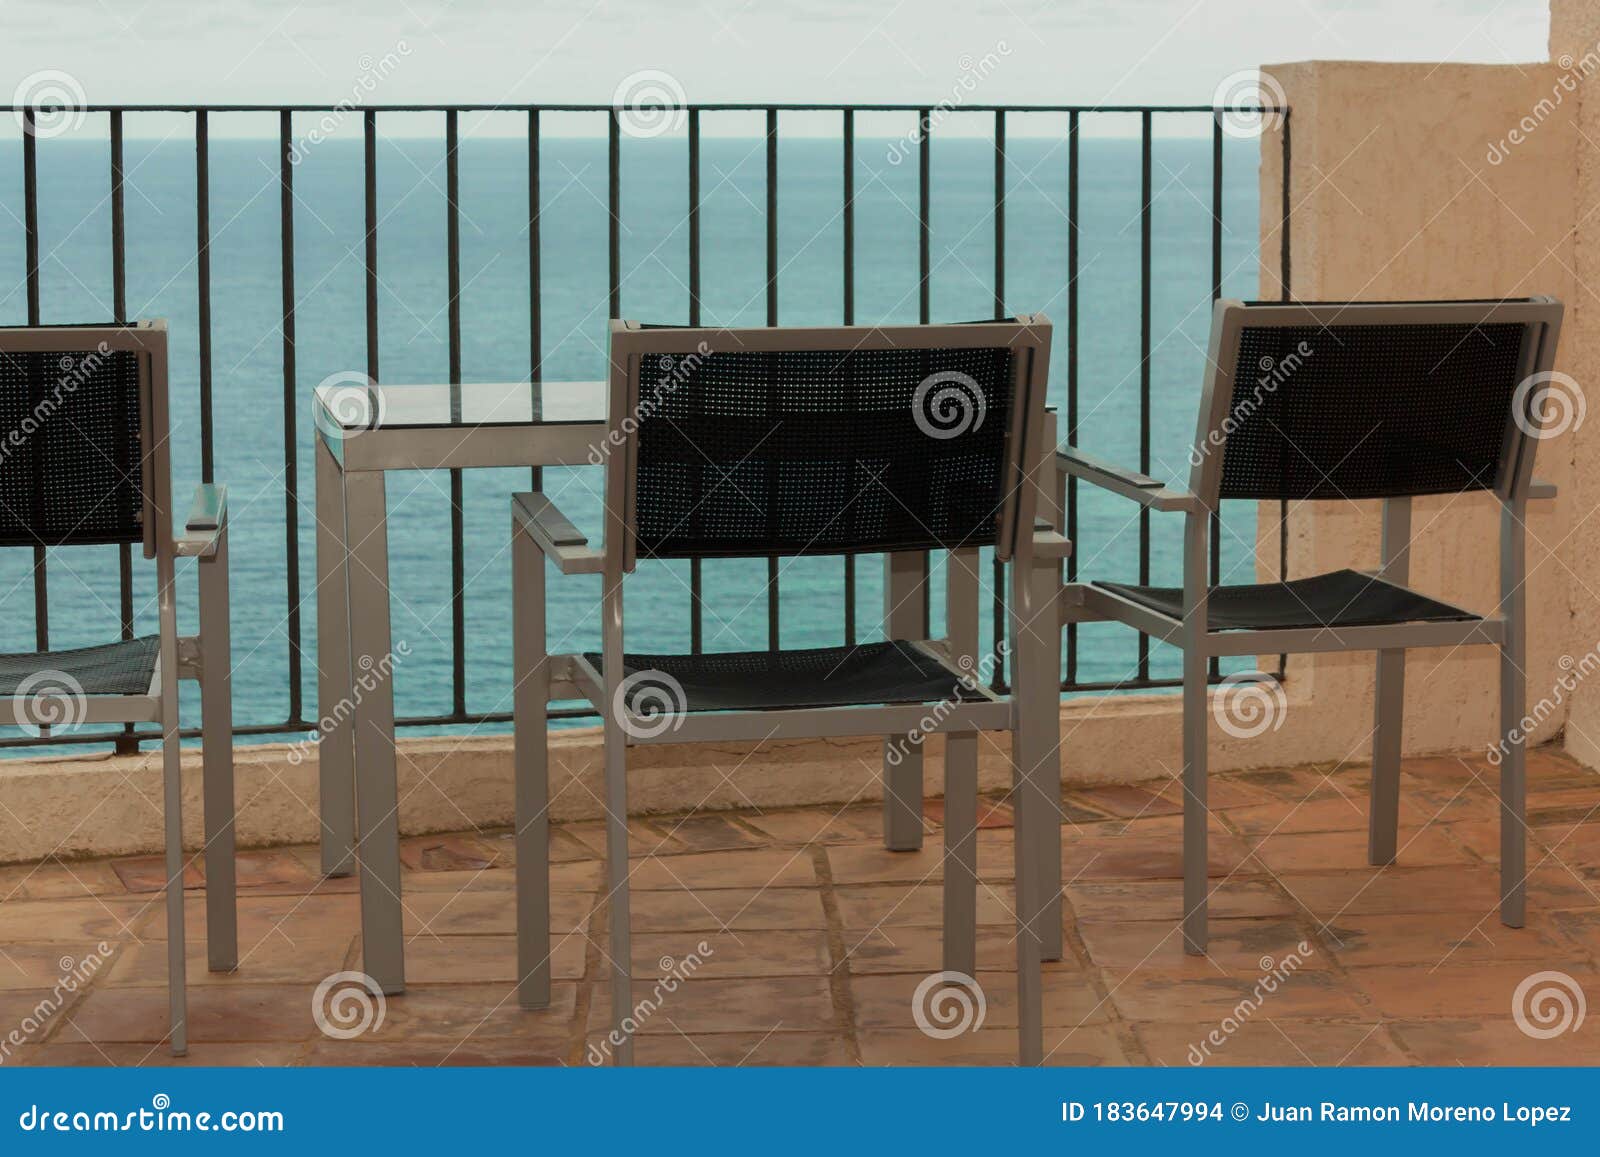 a terrace overlooking the sea